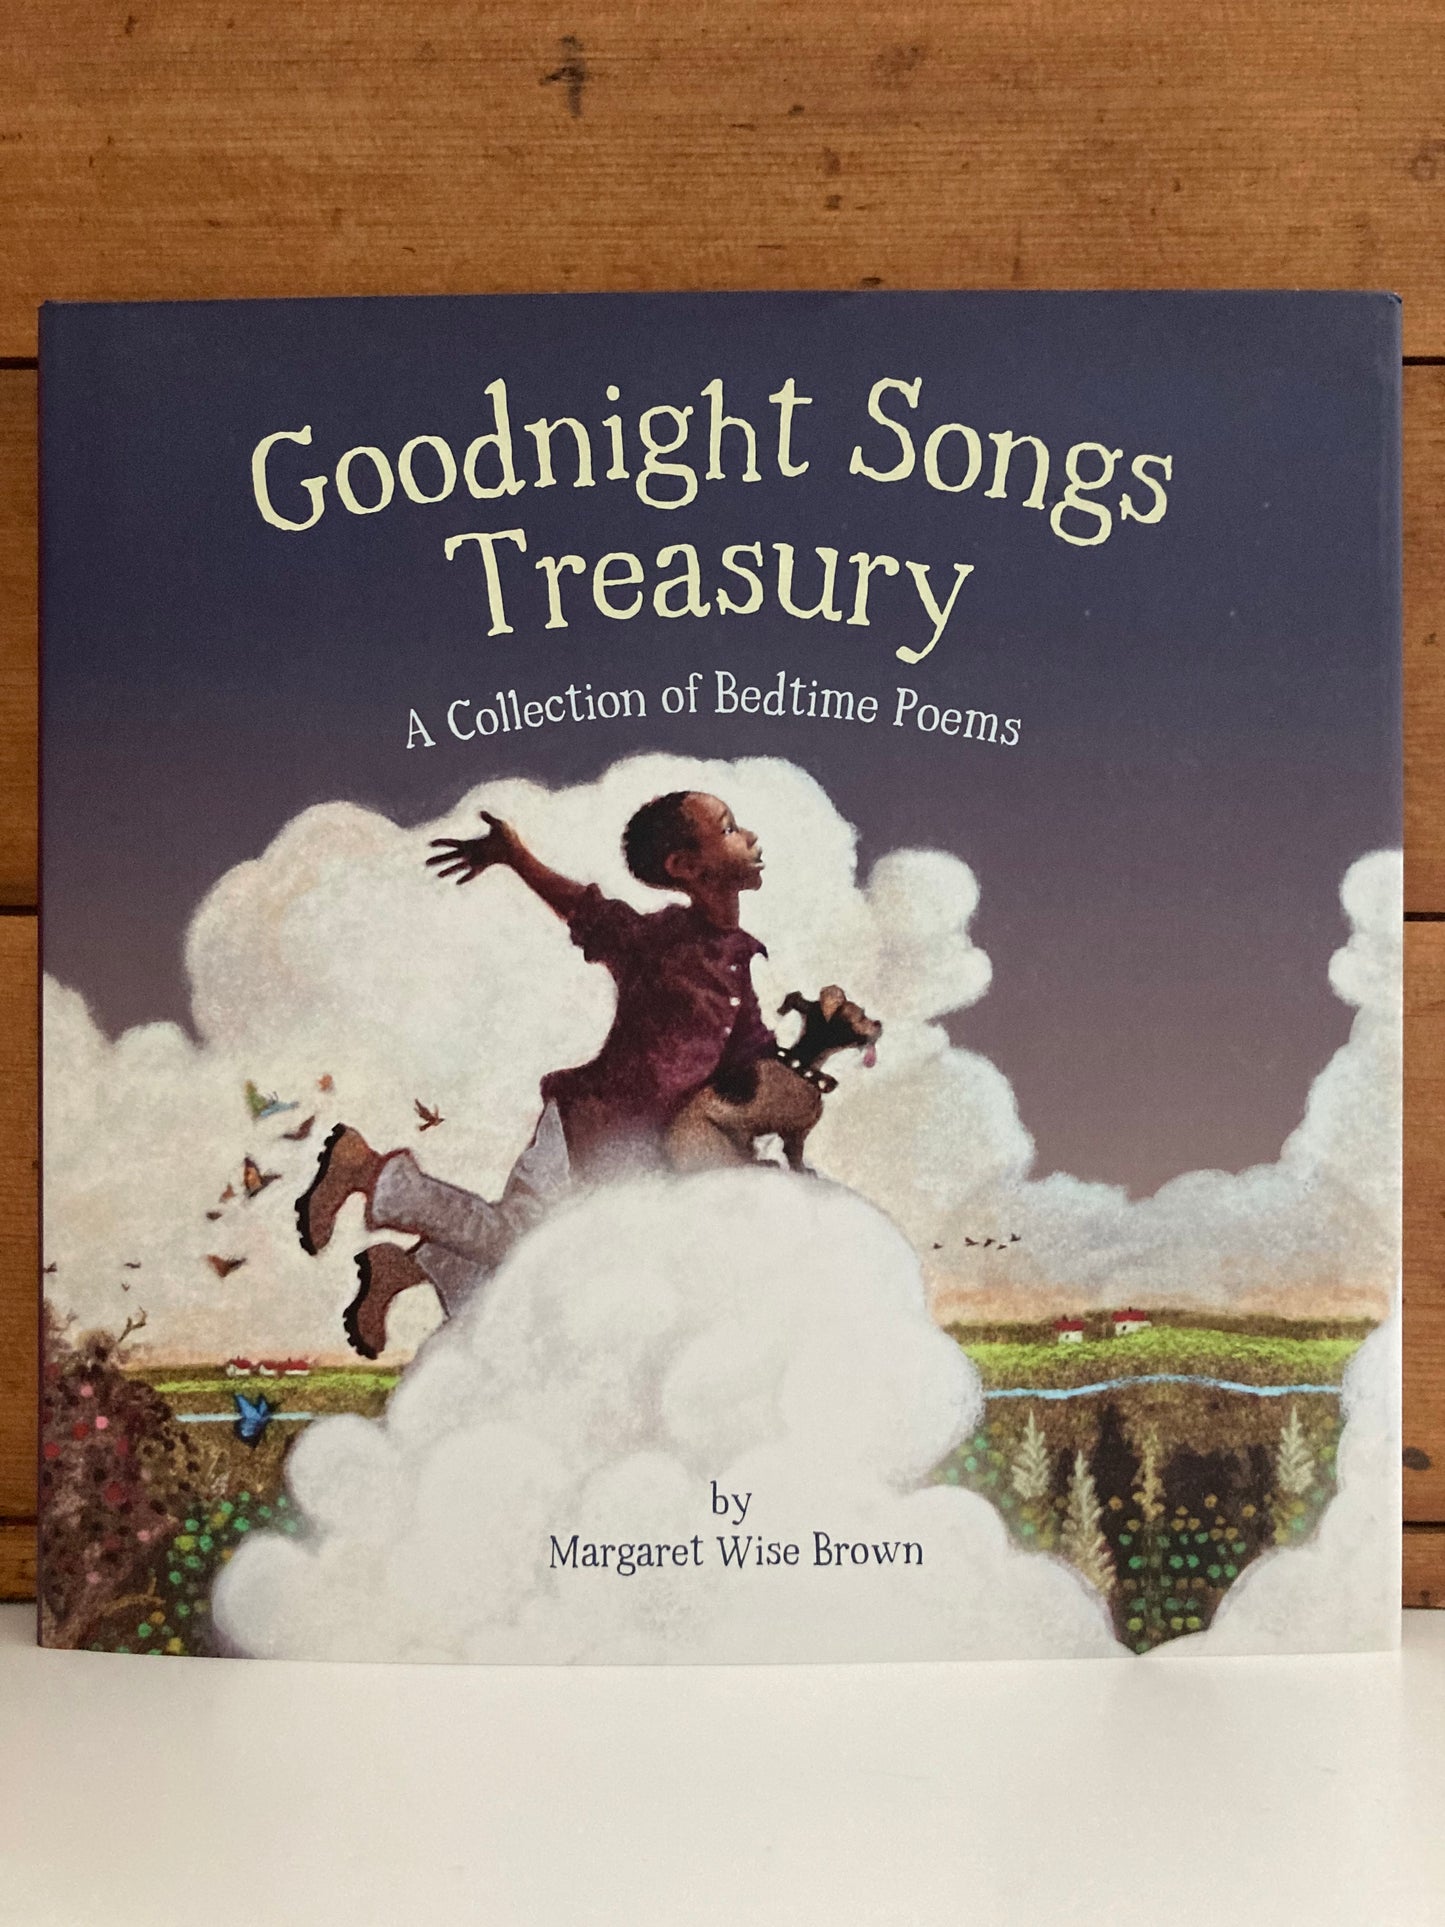 Children's Picture Book of Poems - GOODNIGHT SONGS TREASURY